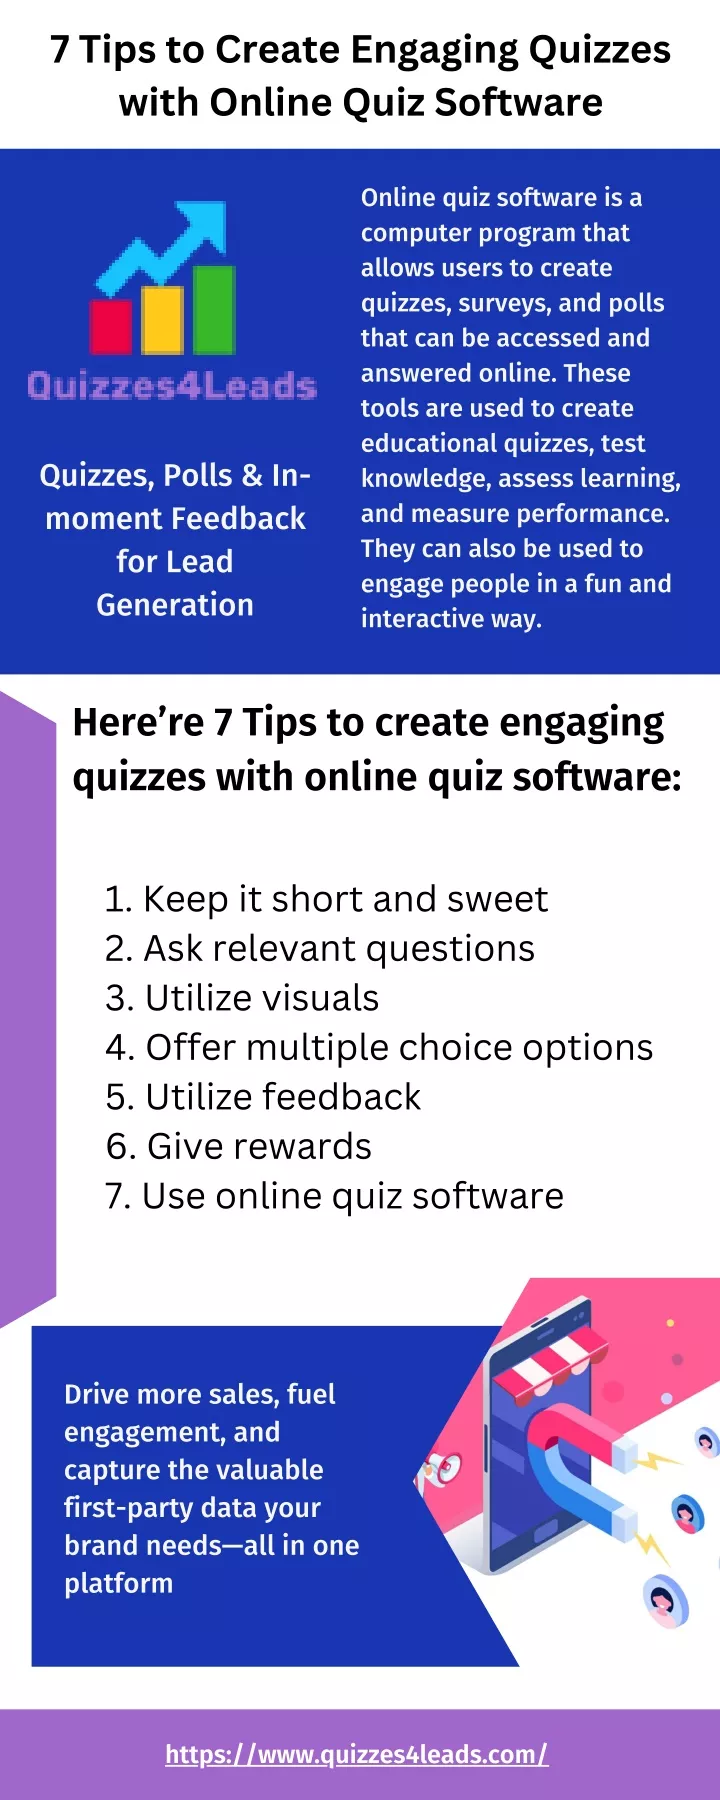 7 tips to create engaging quizzes with online